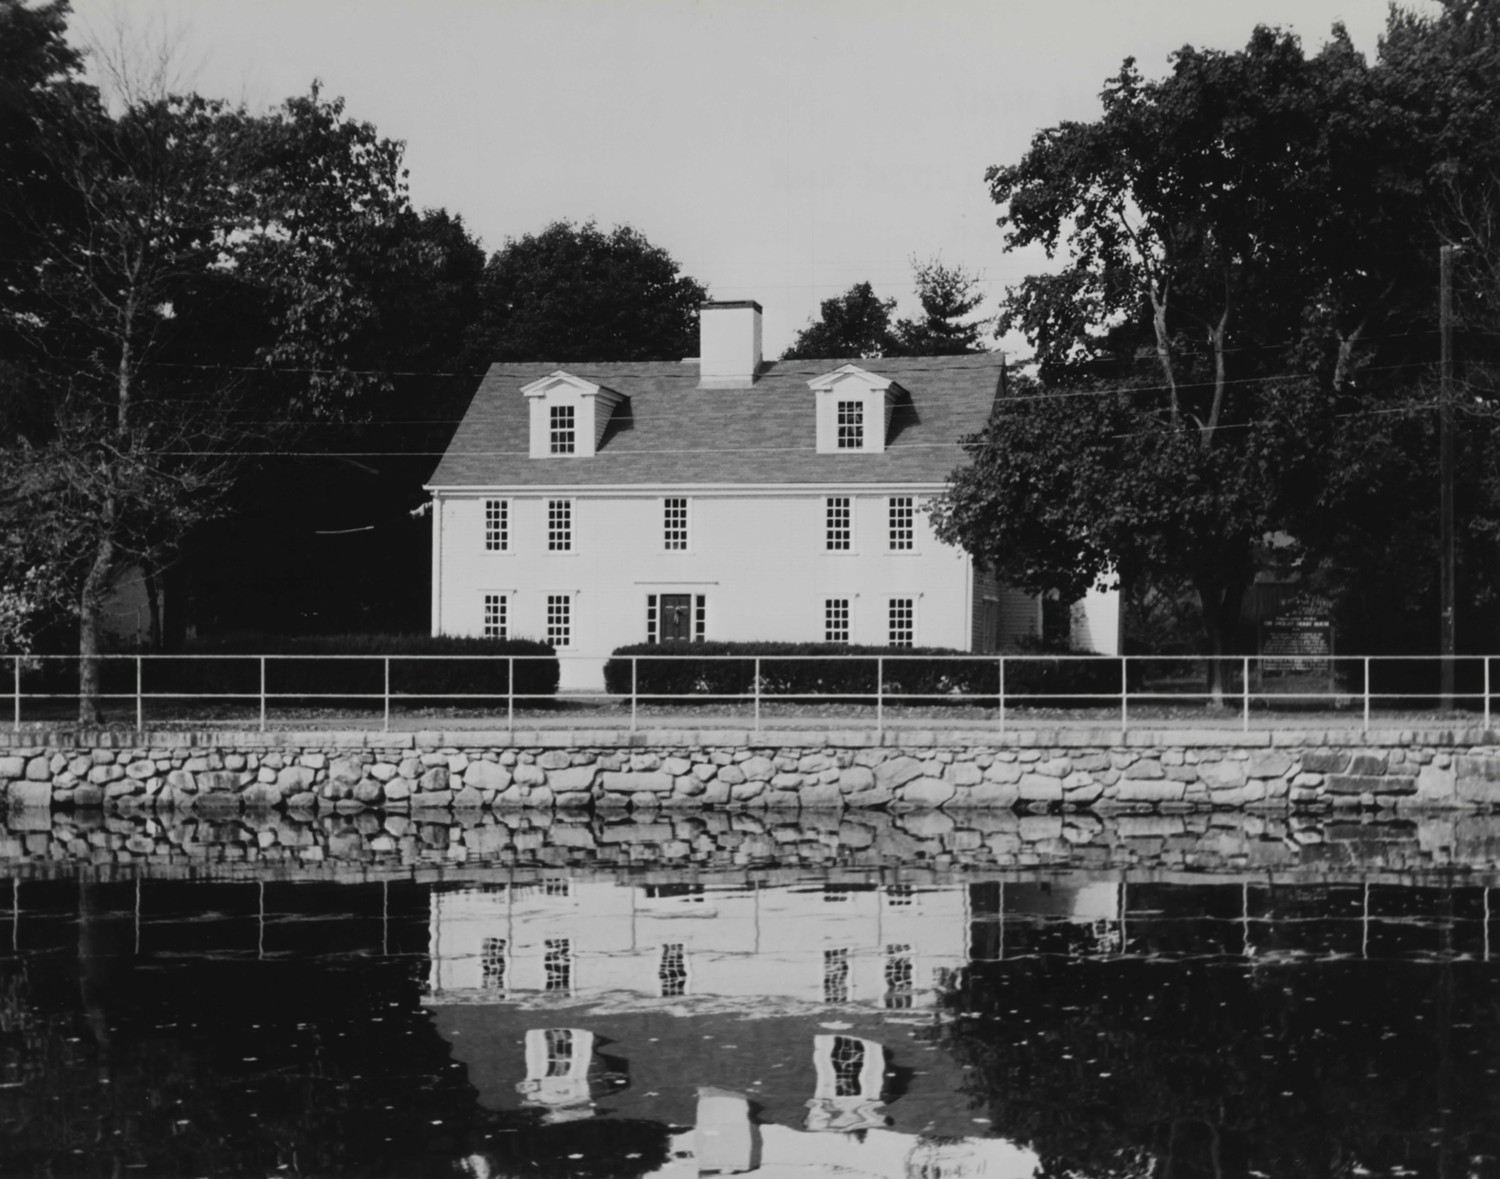 Dwight-Derby House, Medfield Massachusetts South elevation facing Frairy Street and Meetinghouse (Baker's) Pond (1999)